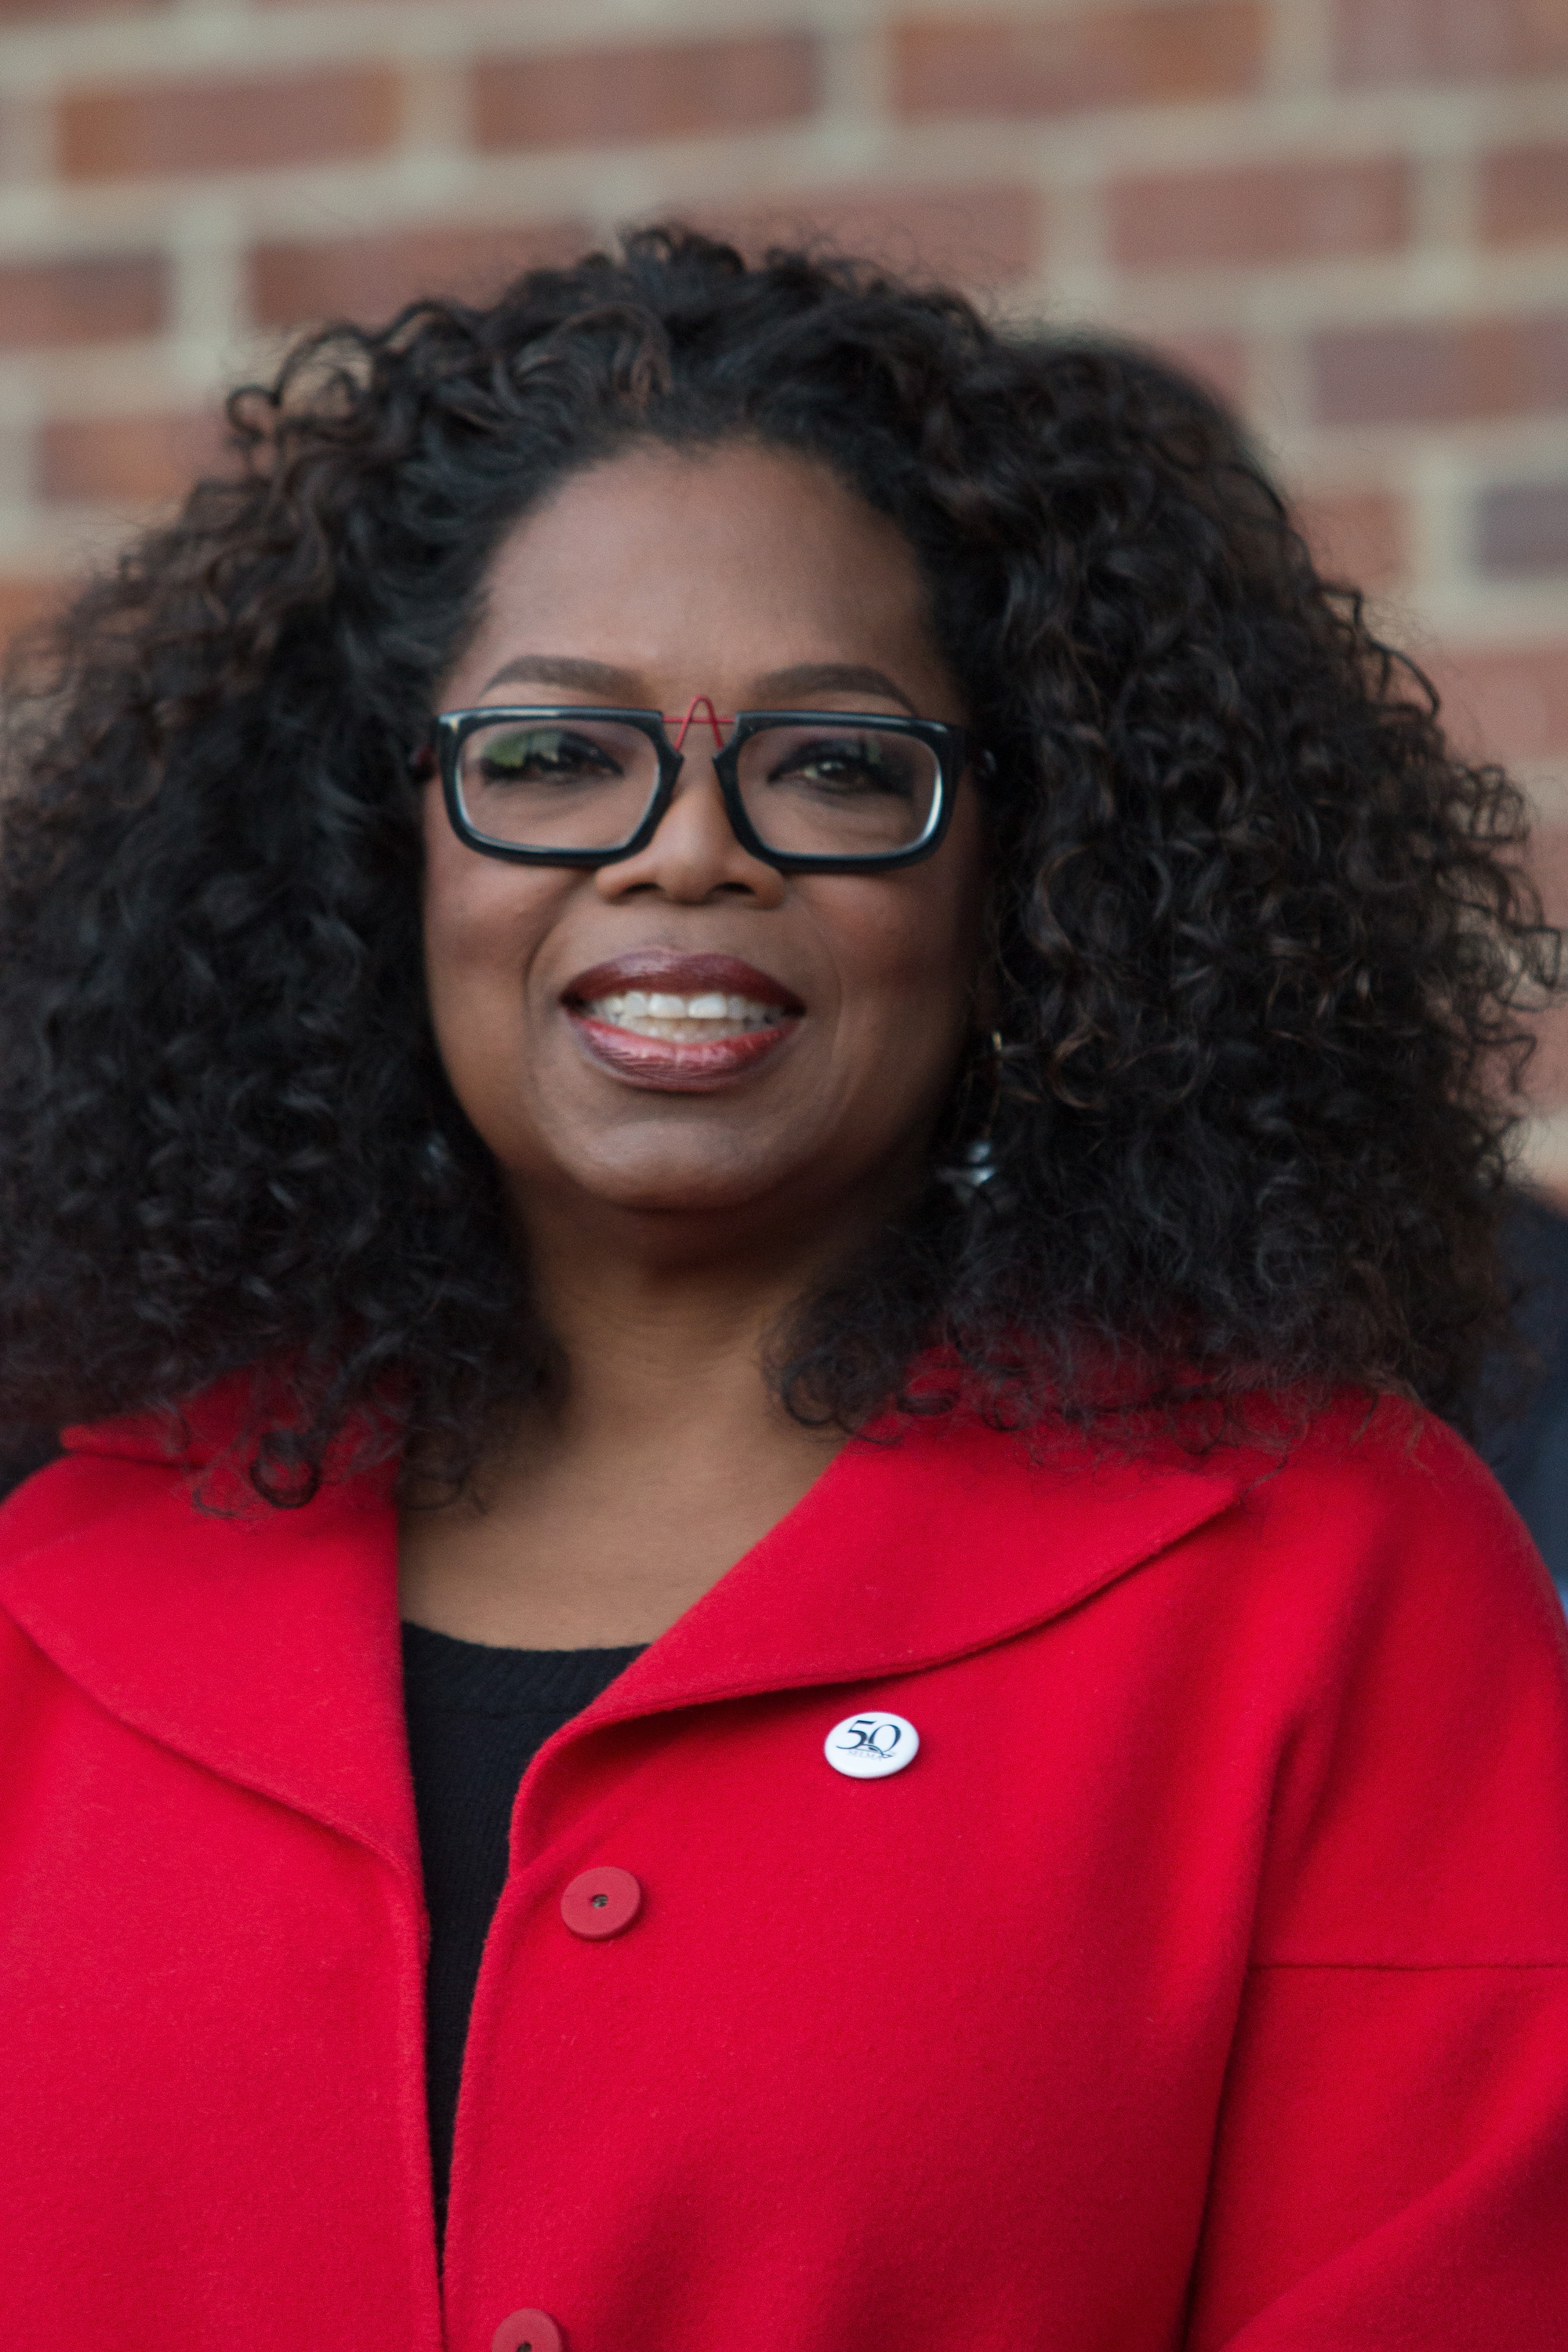 Oprah Winfrey commemorates the life of Dr. Martin Luther King, Jr. on Jan. 18, 2015 in Selma, Alabama.